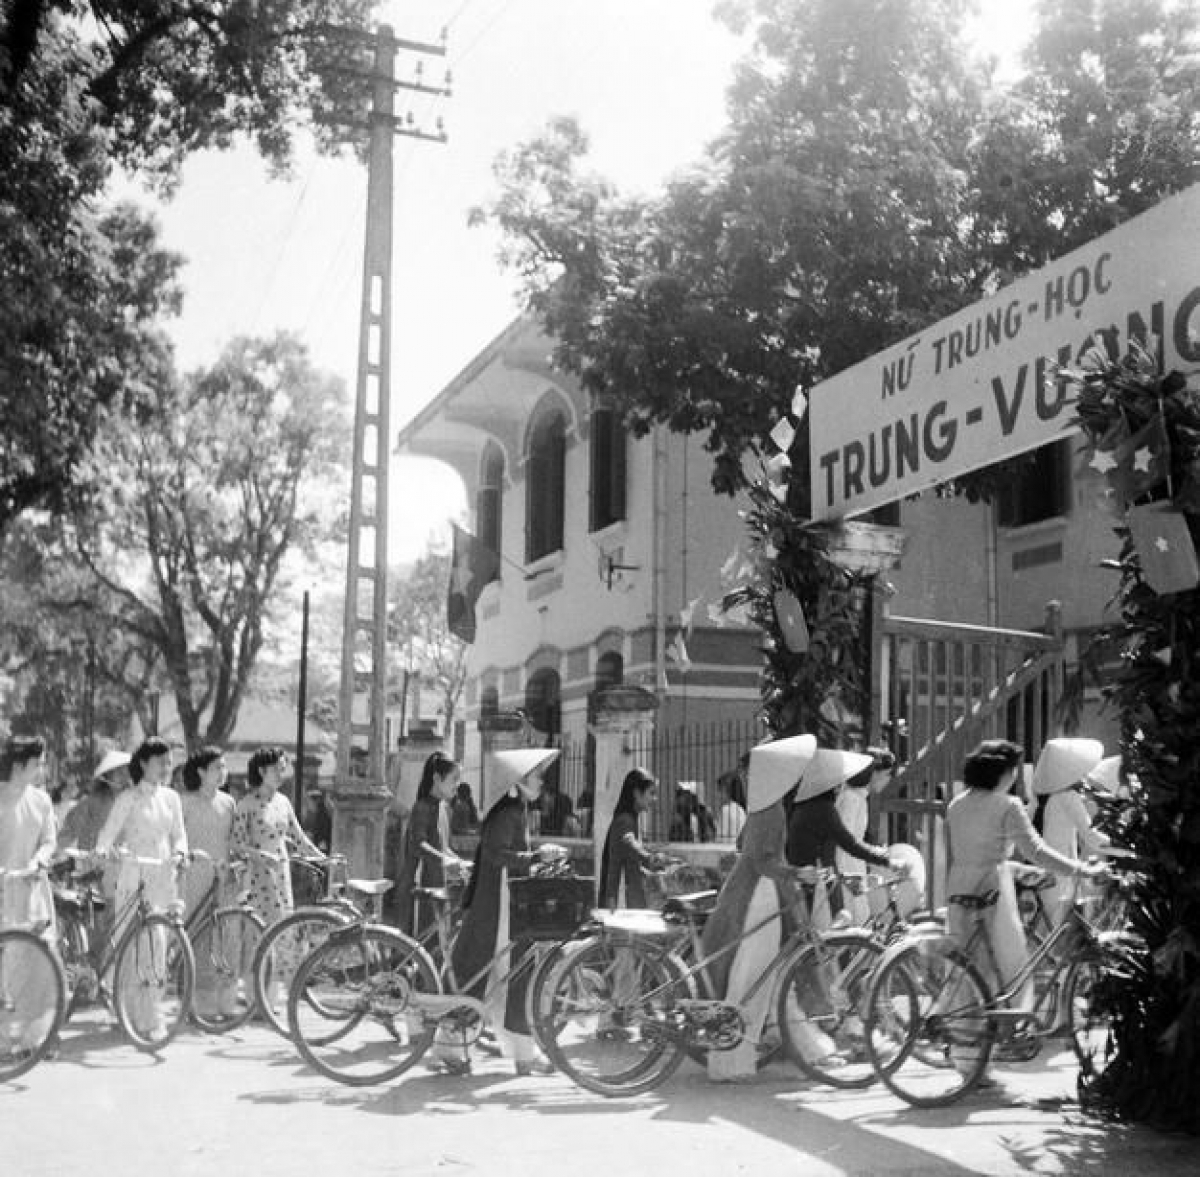 Valuable photos of Hanoi Liberation Day in 1954